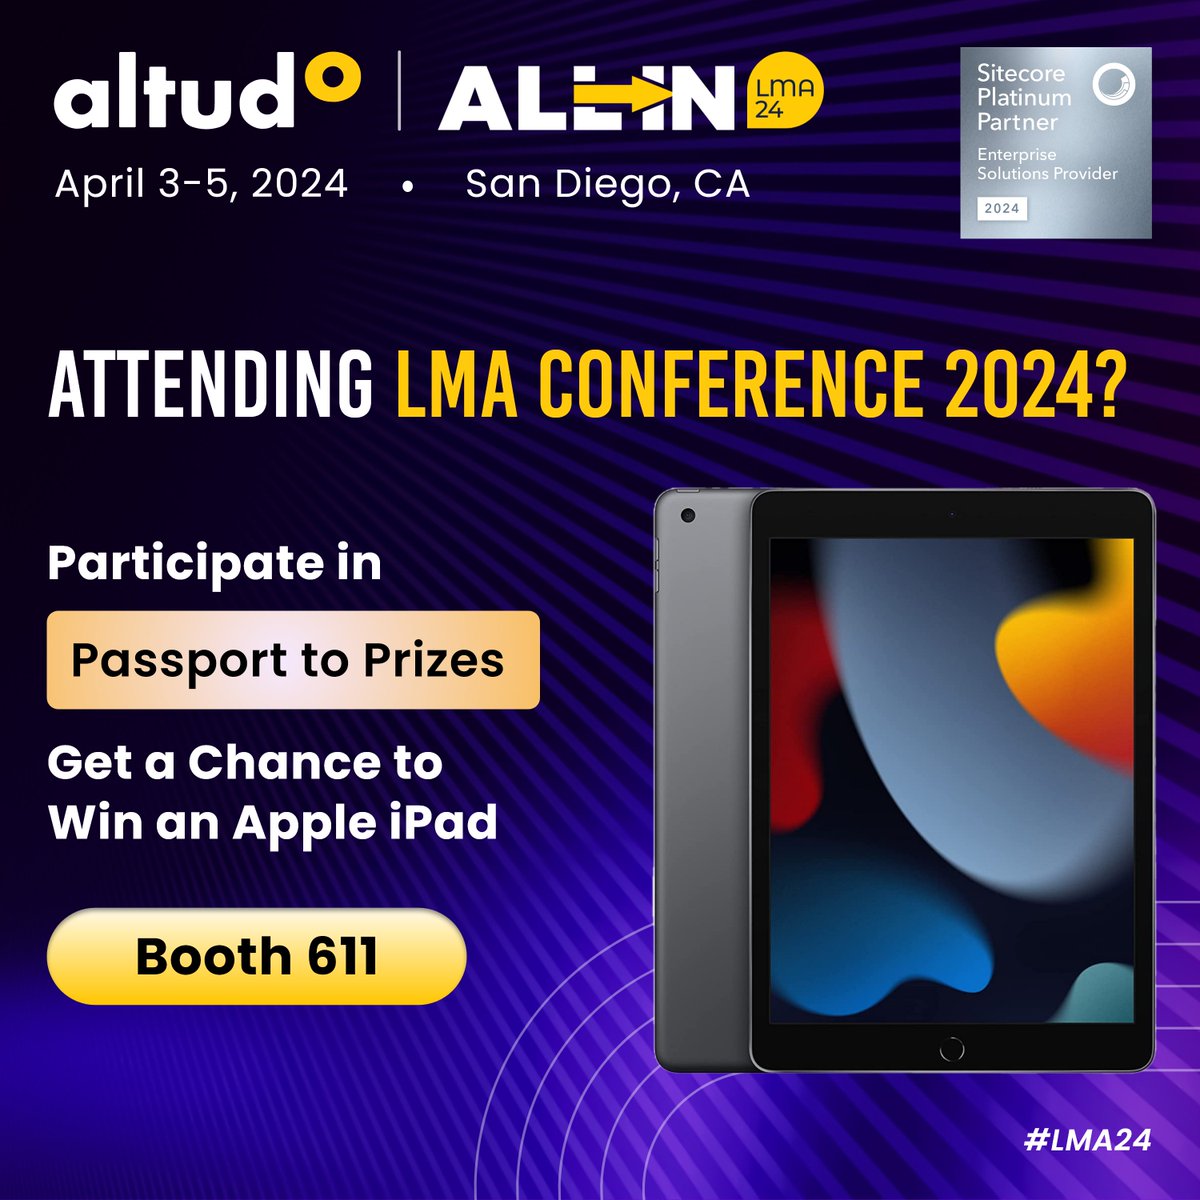 The 'Passport to Prizes' winner will be announced today at #LMA24. We hope you registered &  increased your chances to win #Apple iPad from Altudo.🎉

➡️Learn more: altudo.co/lma-2024?utm_s…

@Sitecore
#LegalMarketing #MarketingEvent #SitecorePartner #AltudoEvents